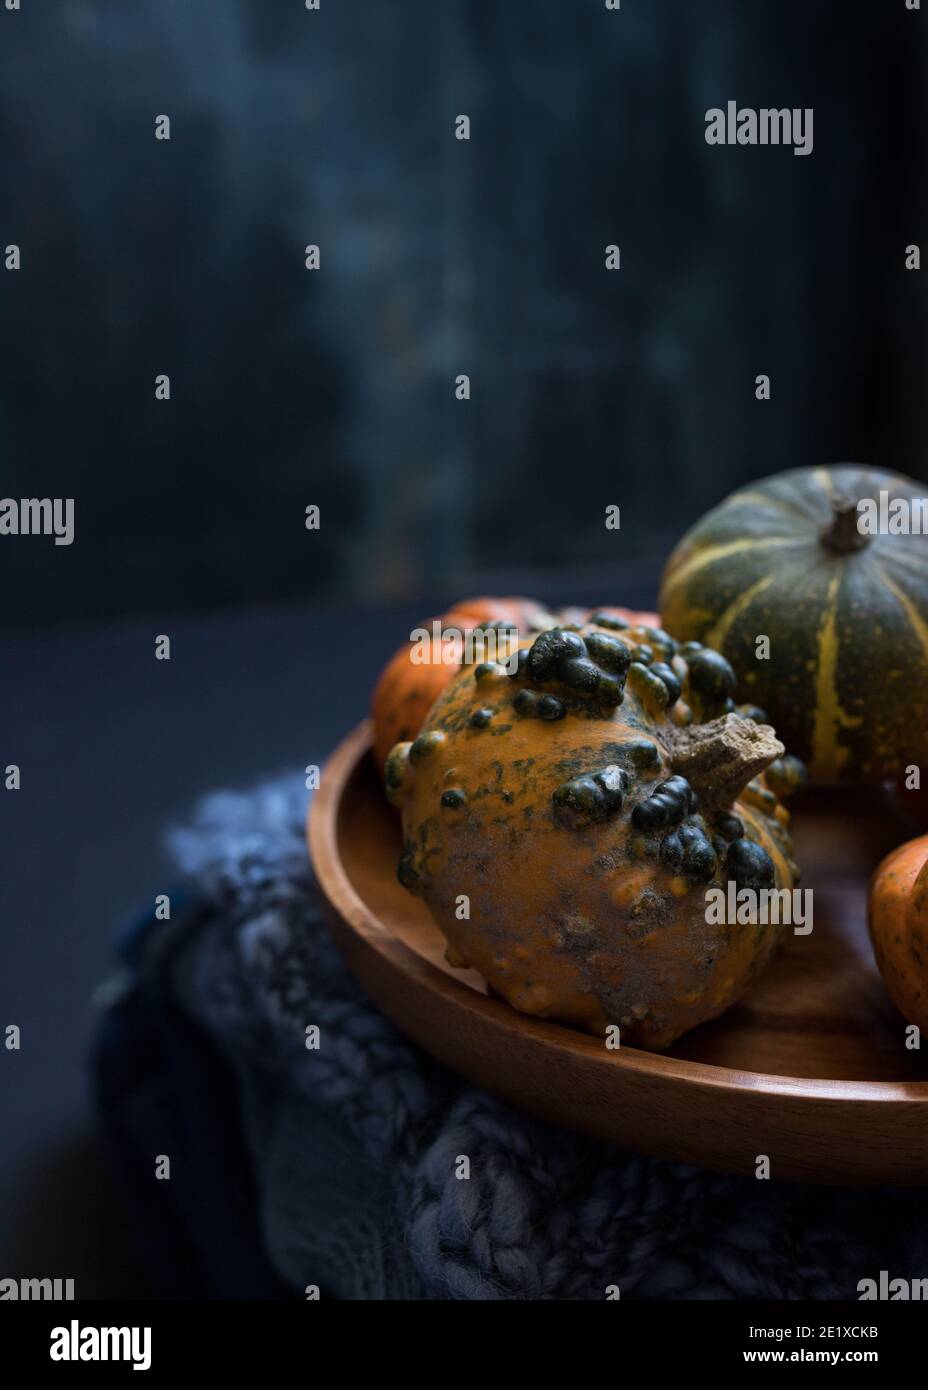 Closeup view of a dwarf and ugly pumpkin. It is laid and is sharing a wooden dish with three more little pumpkins. Dark blue background. Stock Photo